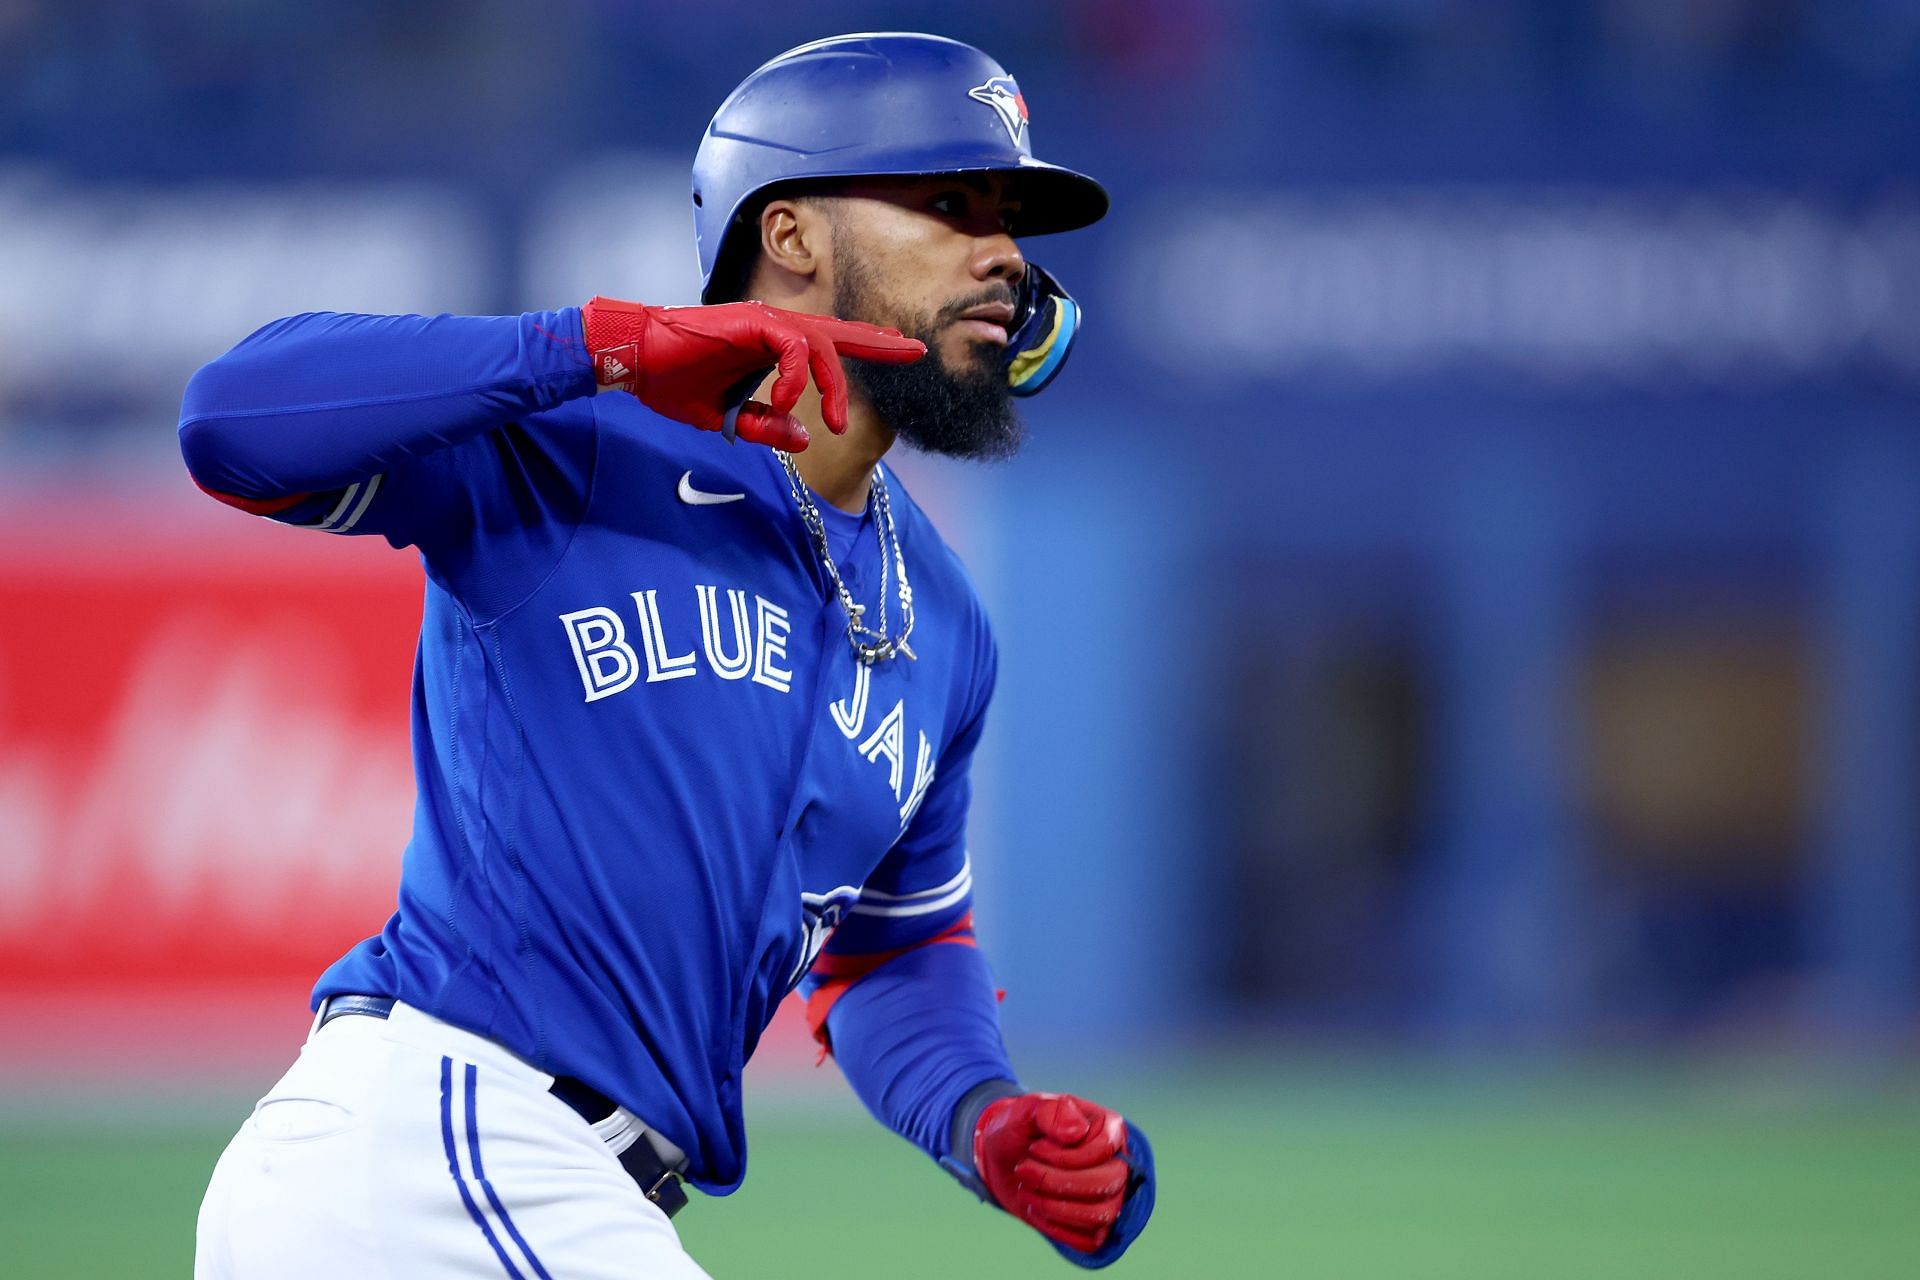 Toronto Blue Jays trade outfielder Teoscar Hernández to the Mariners